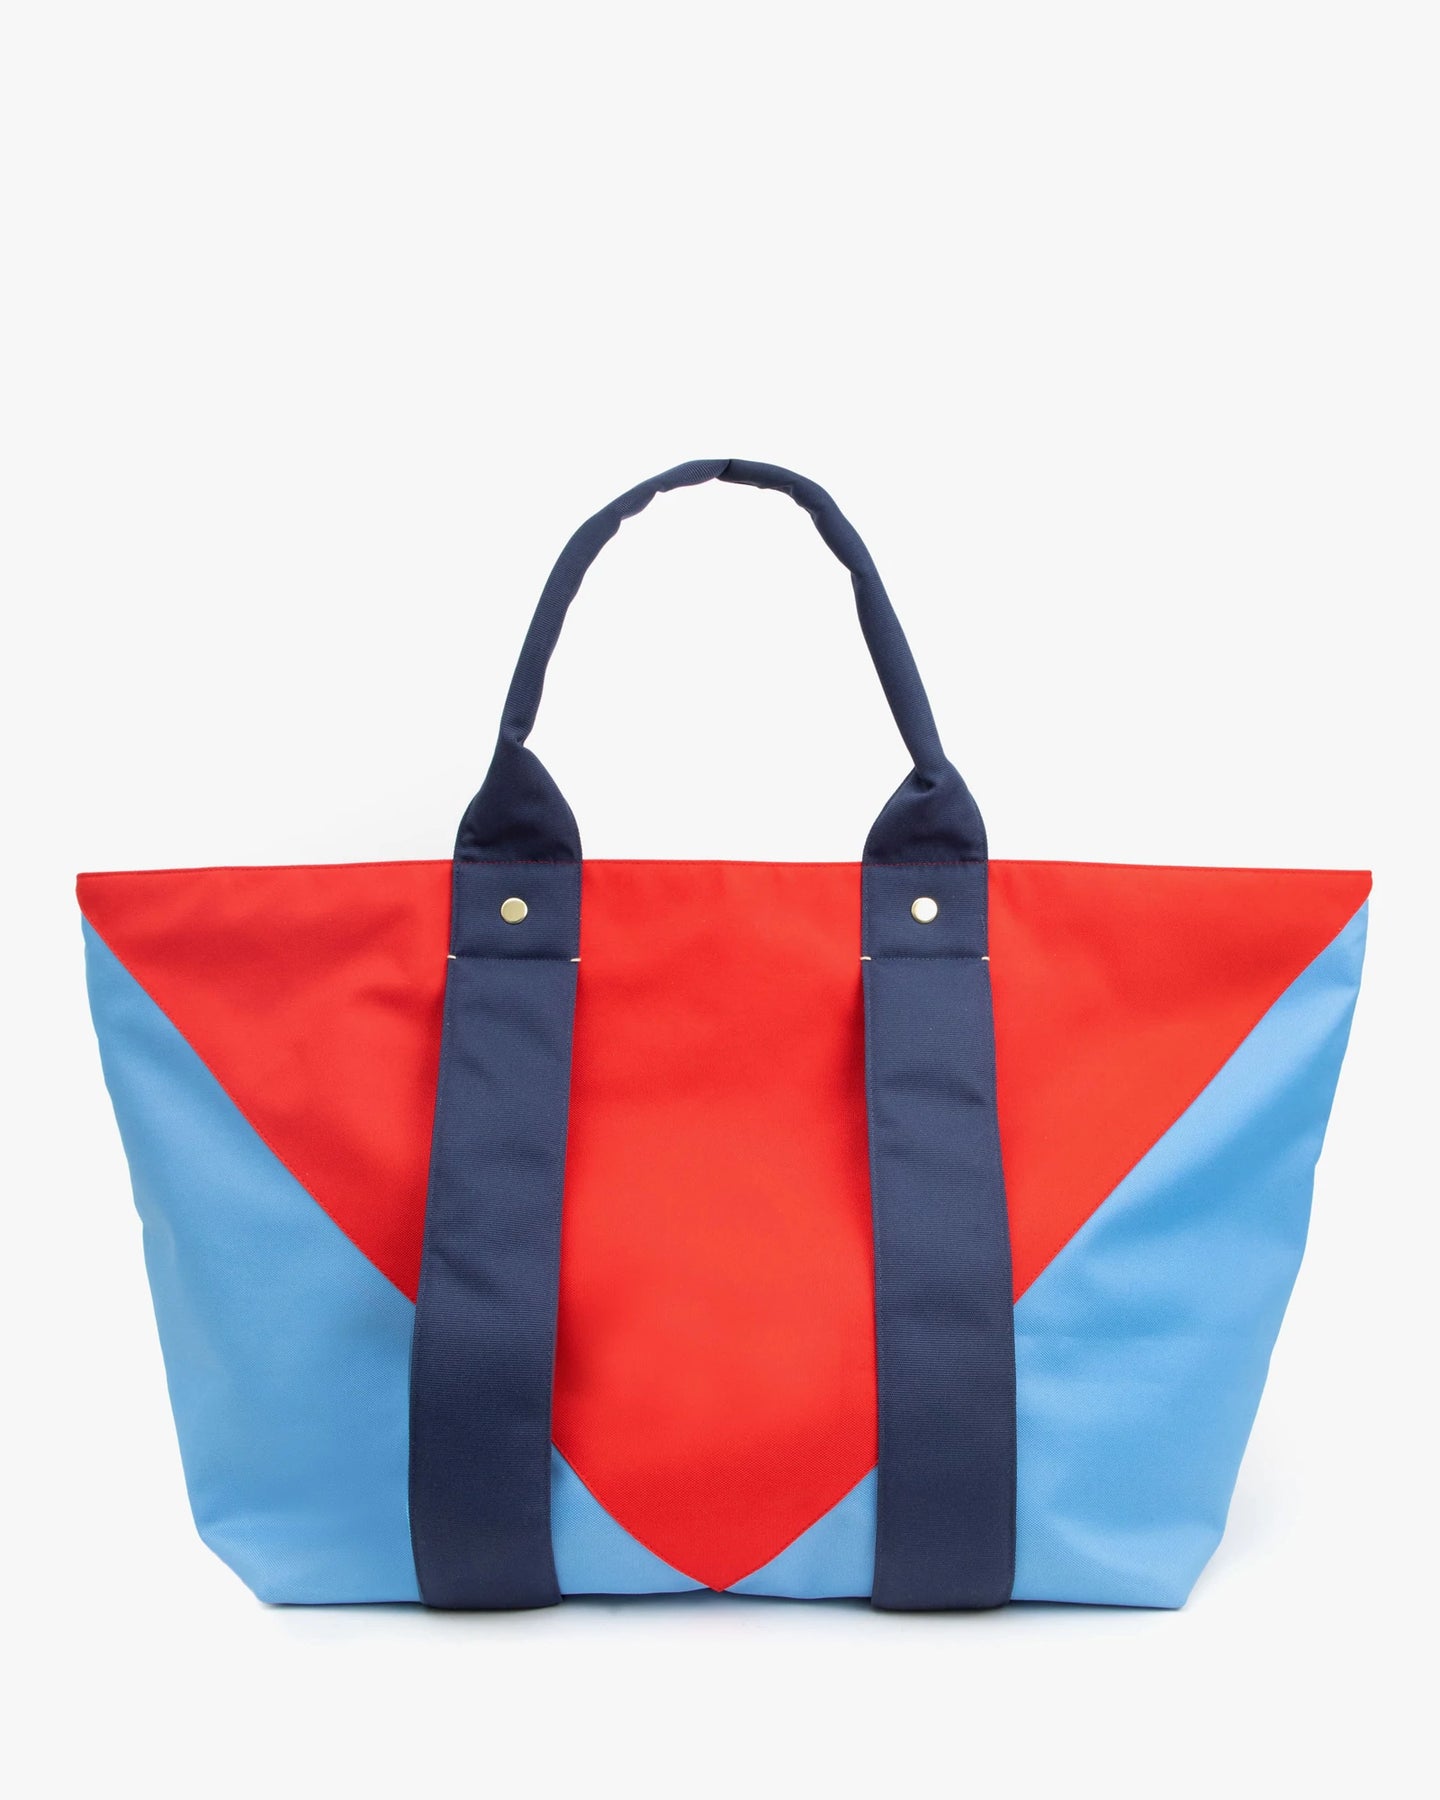 Clare V. Giant Trop Tote